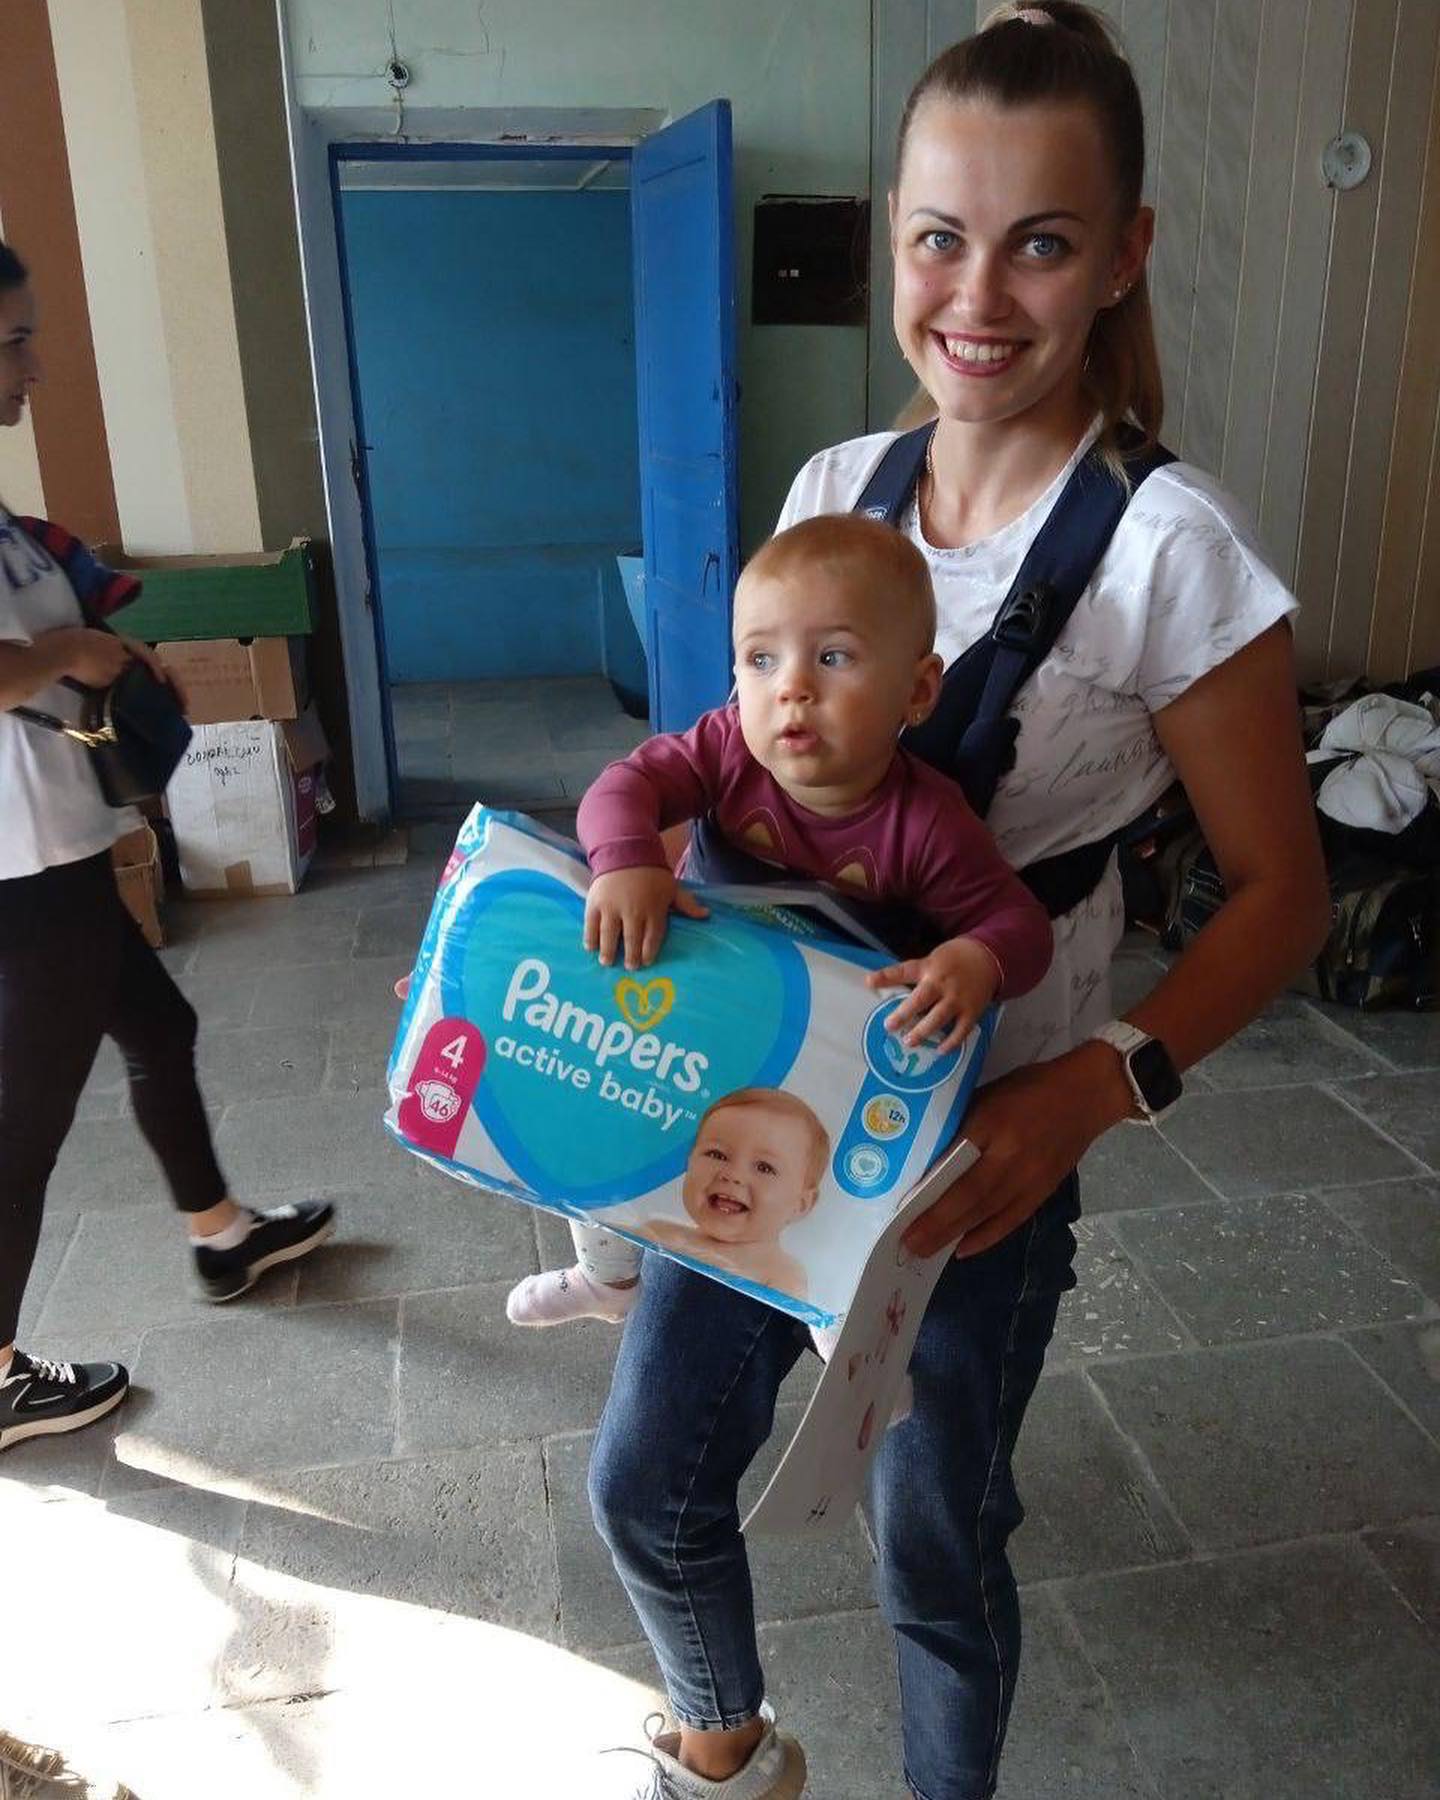 A woman carrying a baby in a diaper box.